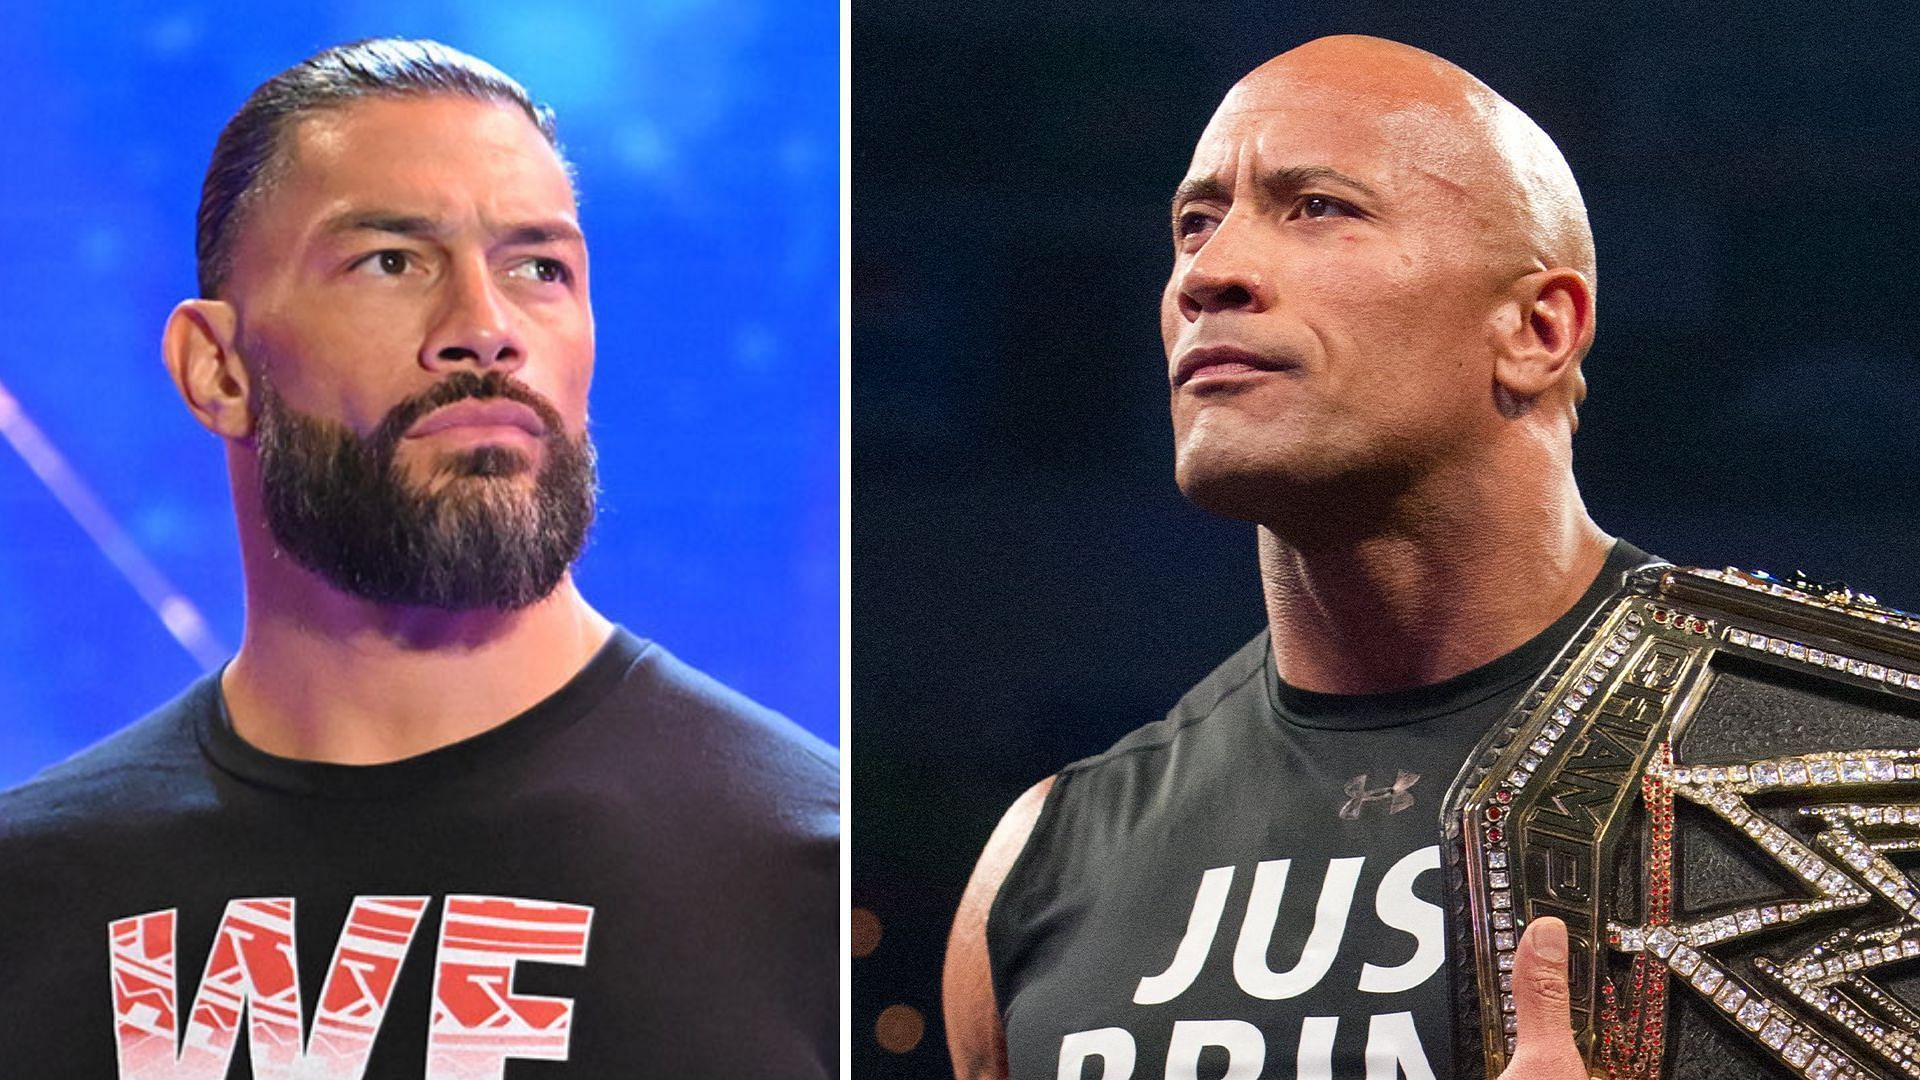 Roman Reigns is rumored to face The Rock at WWE WrestleMania